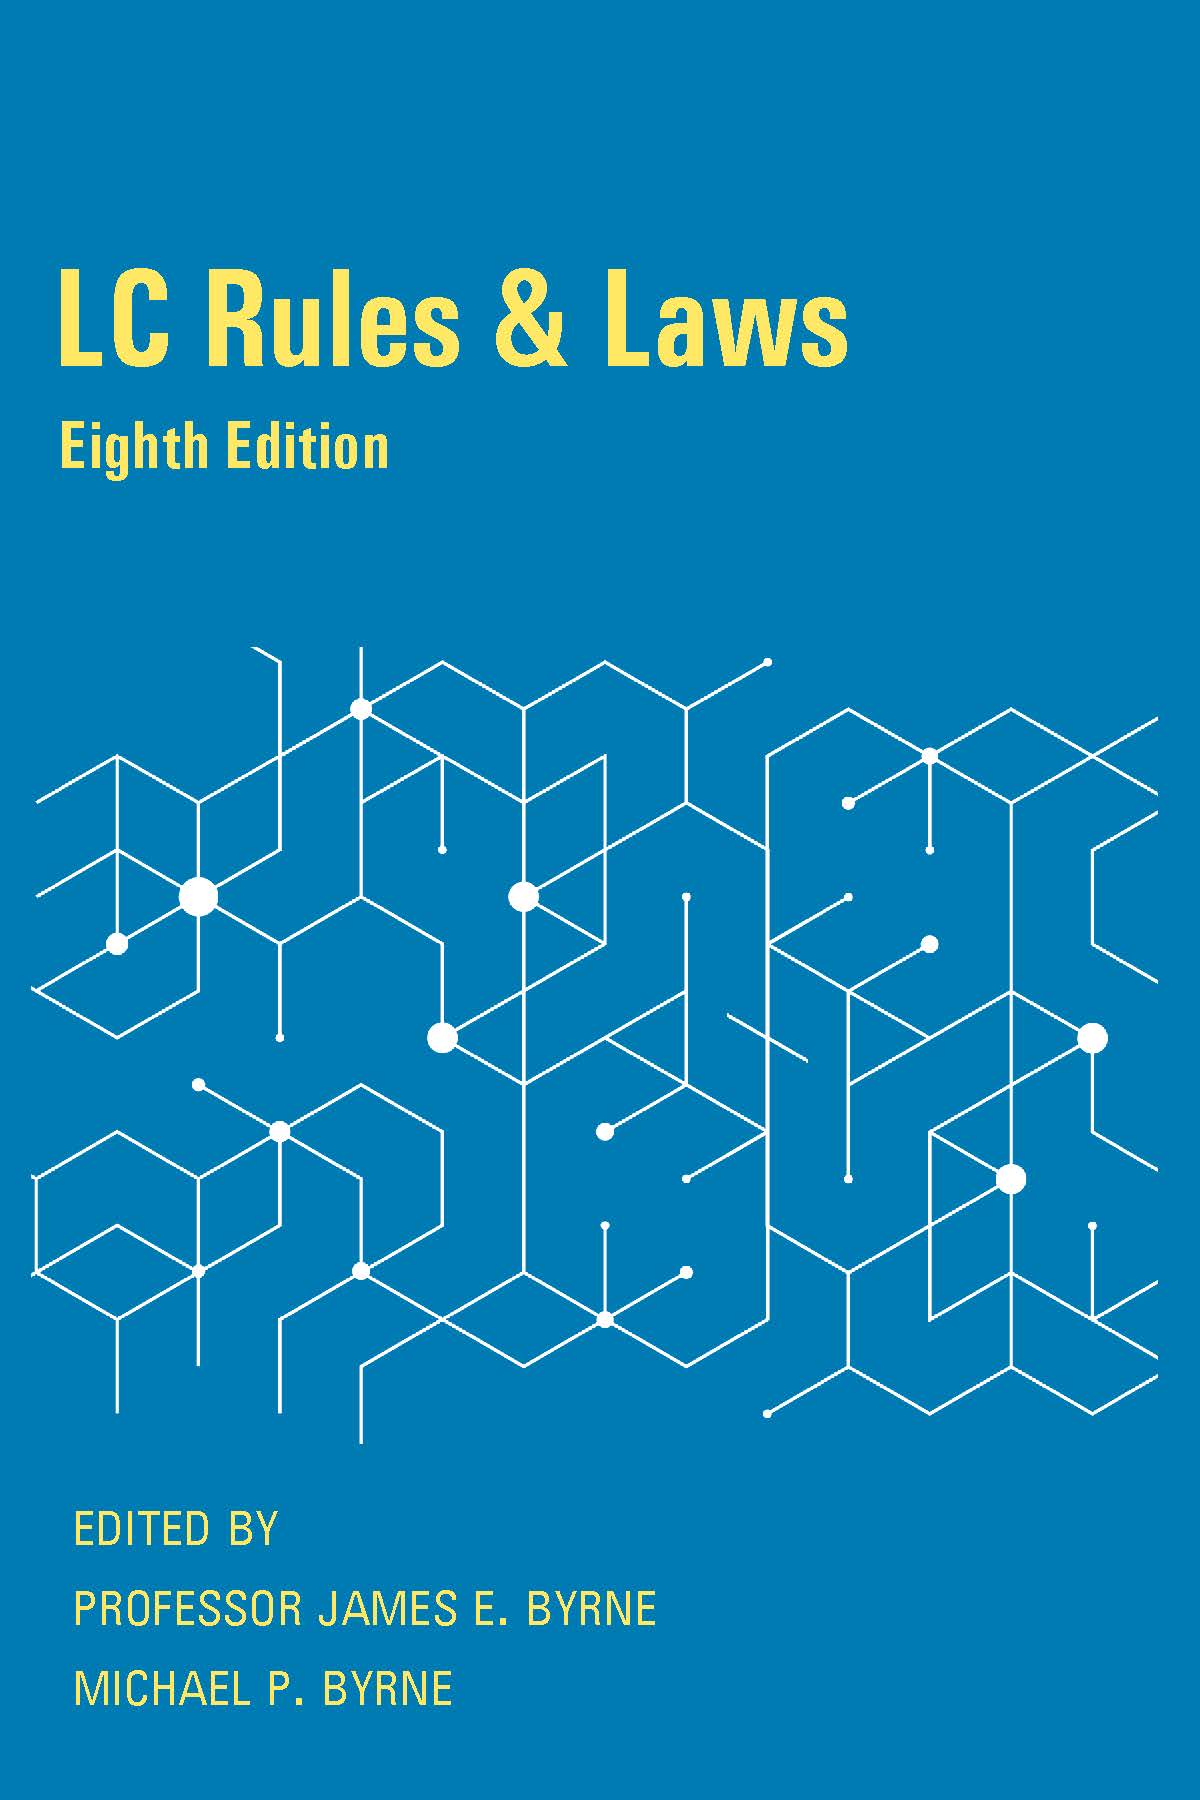 LC Rules & Laws: Critical Texts for Independent Undertakings (8th edition)